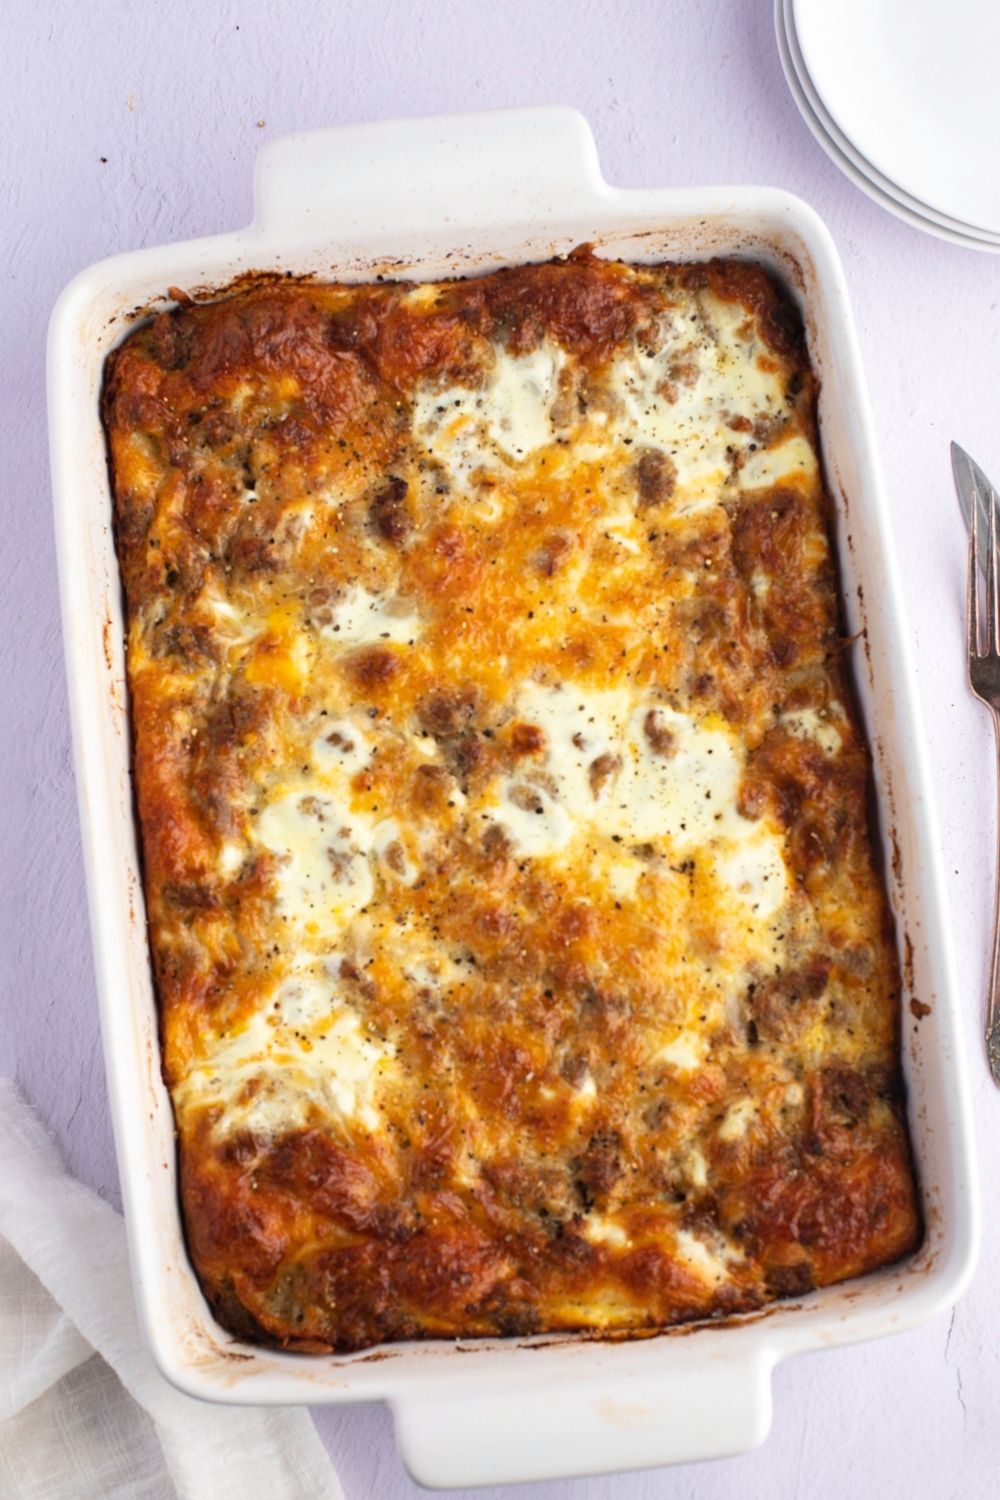 Baked pork sausage, egg and cheese casserole